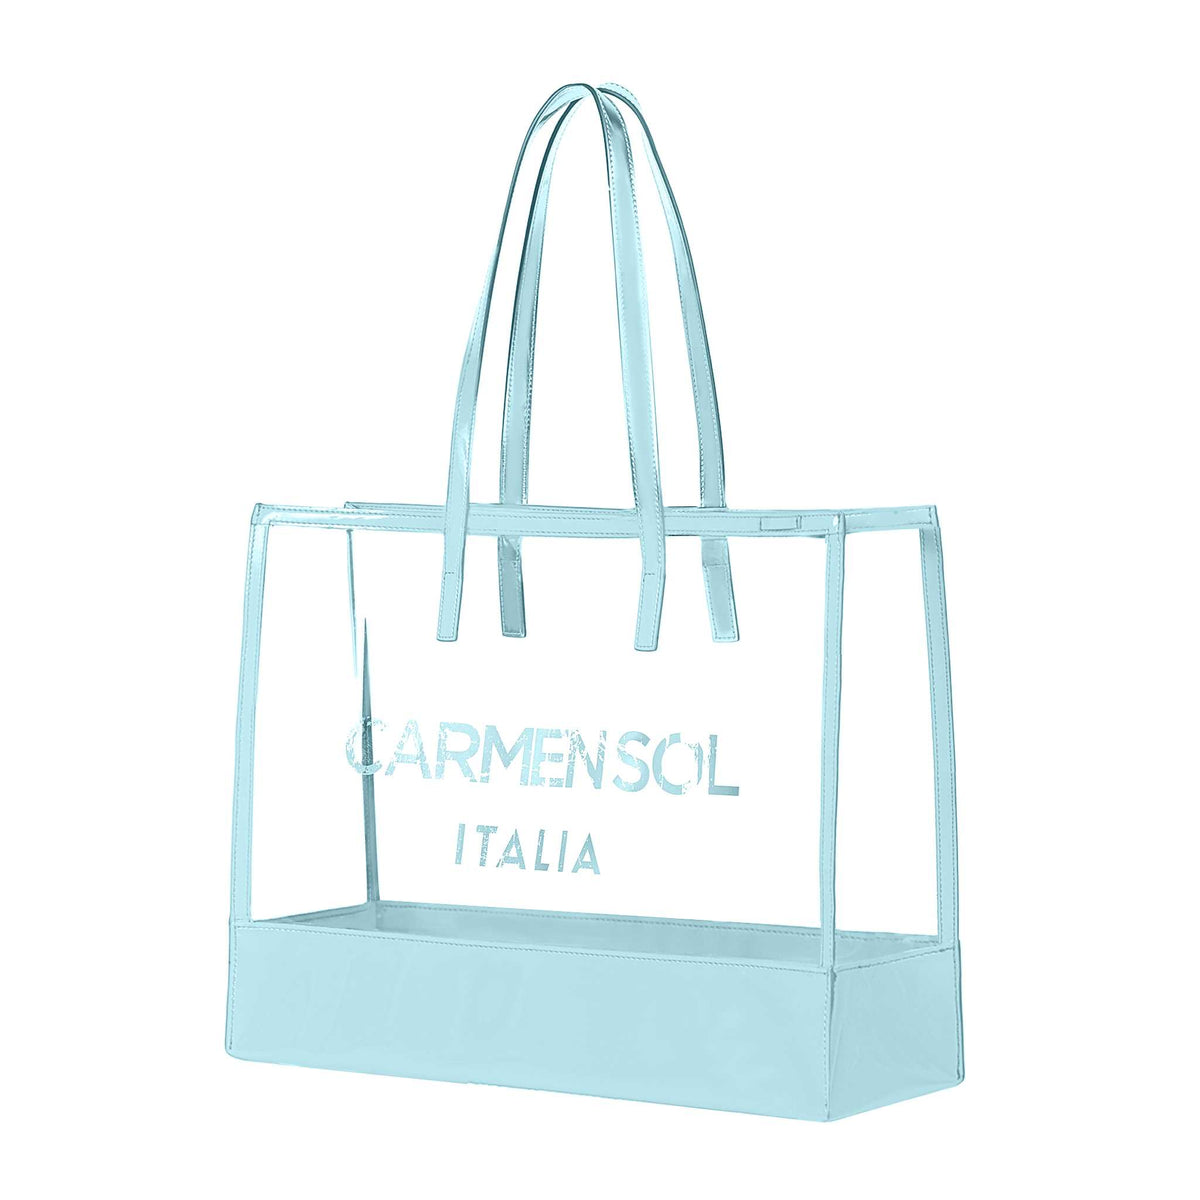 Taormina large tote bags in color baby blue